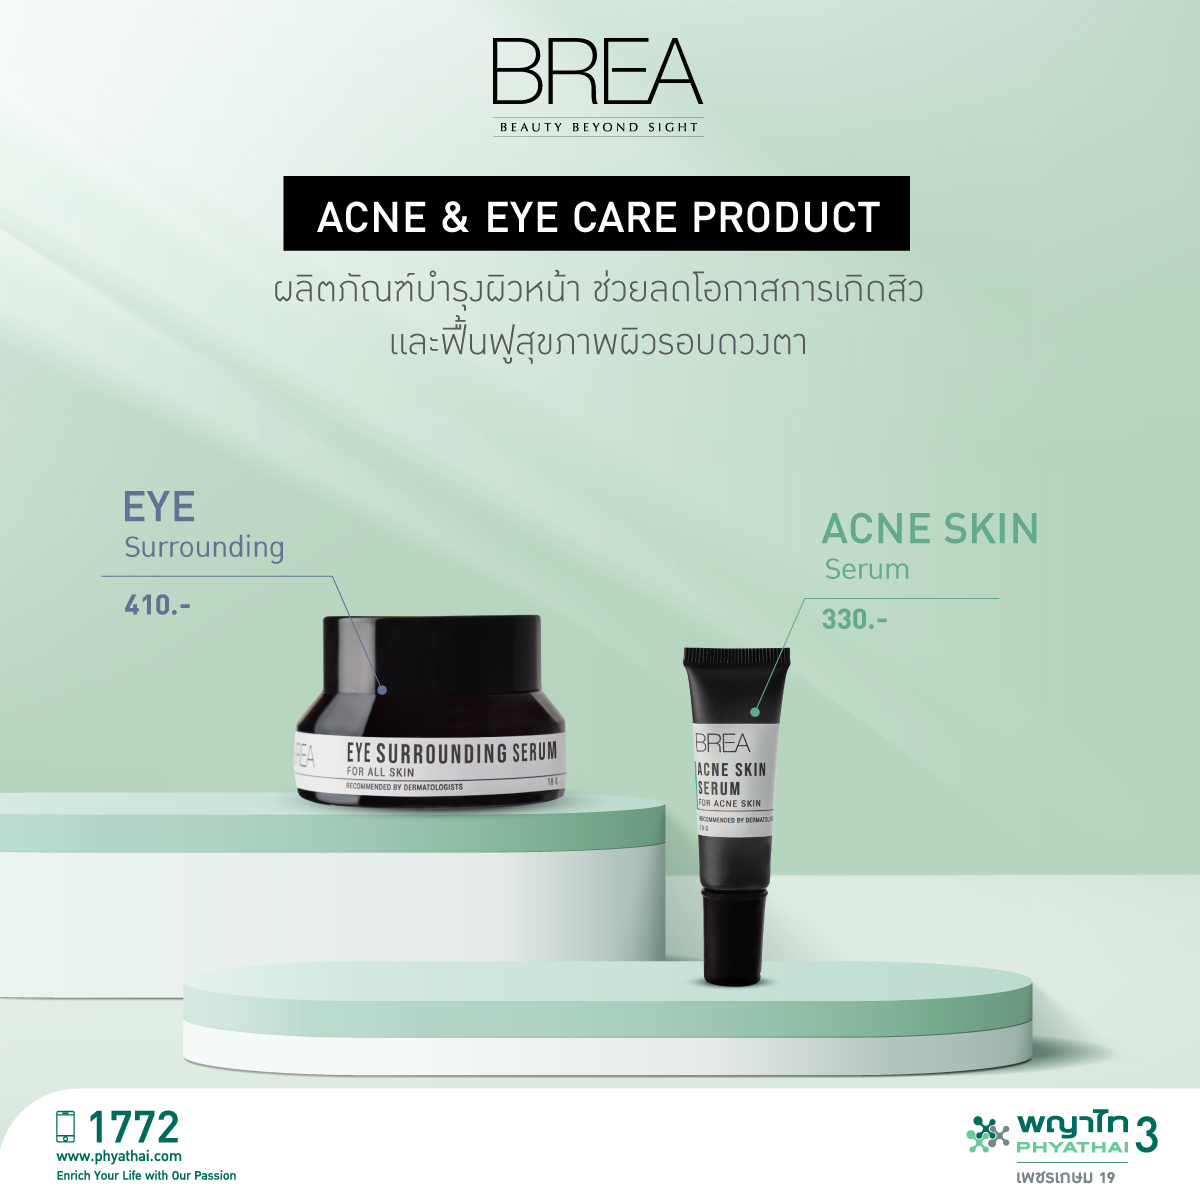 ACNE & EYE CARE PRODUCT